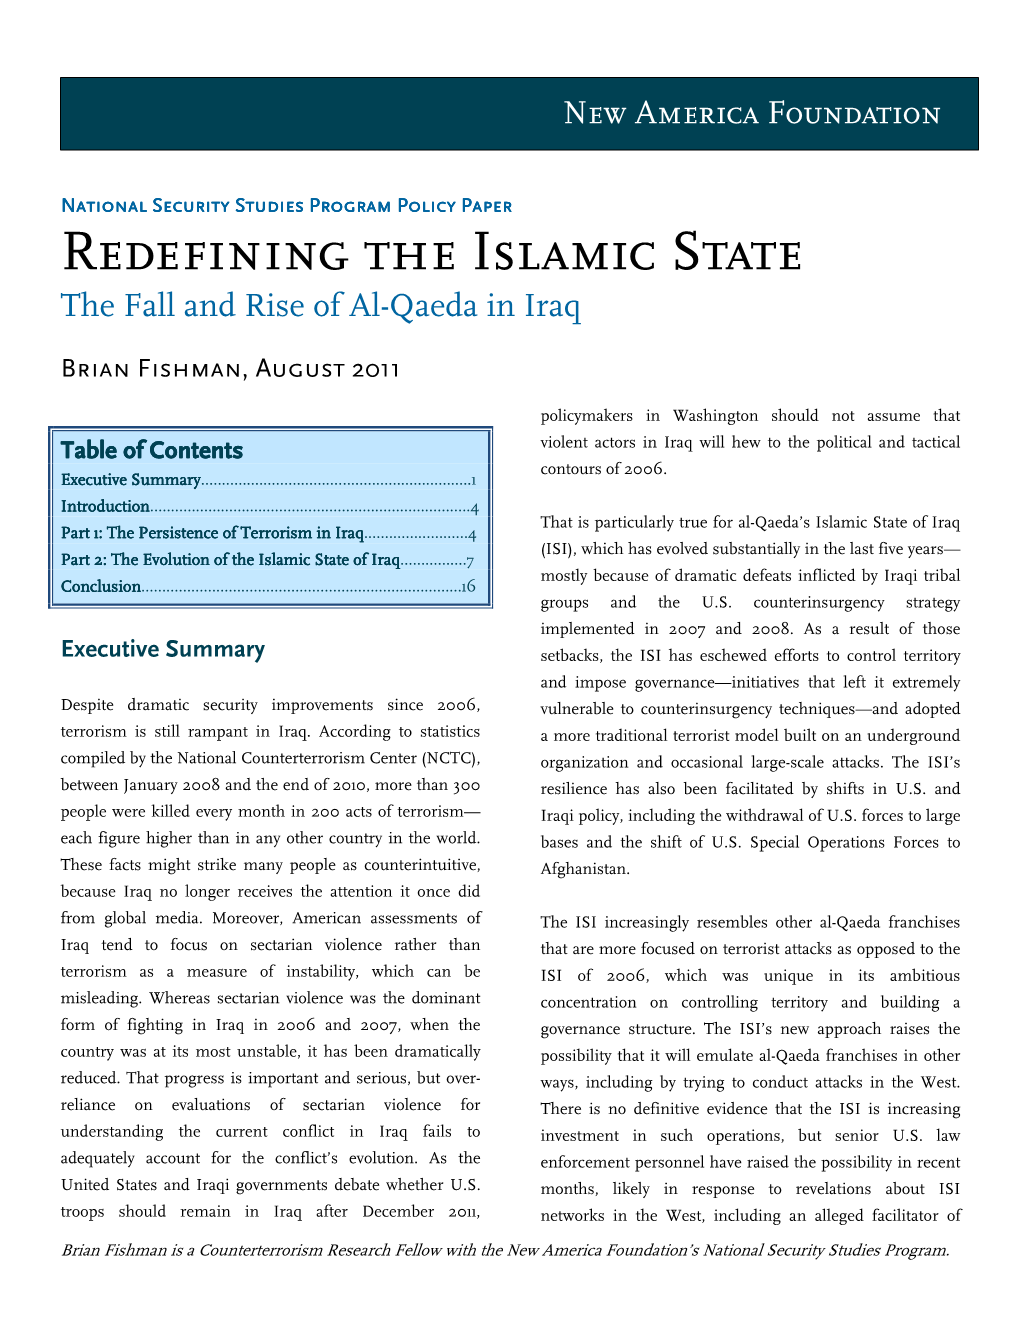 Redefining the Islamic State the Fall and Rise of Al-Qaeda in Iraq